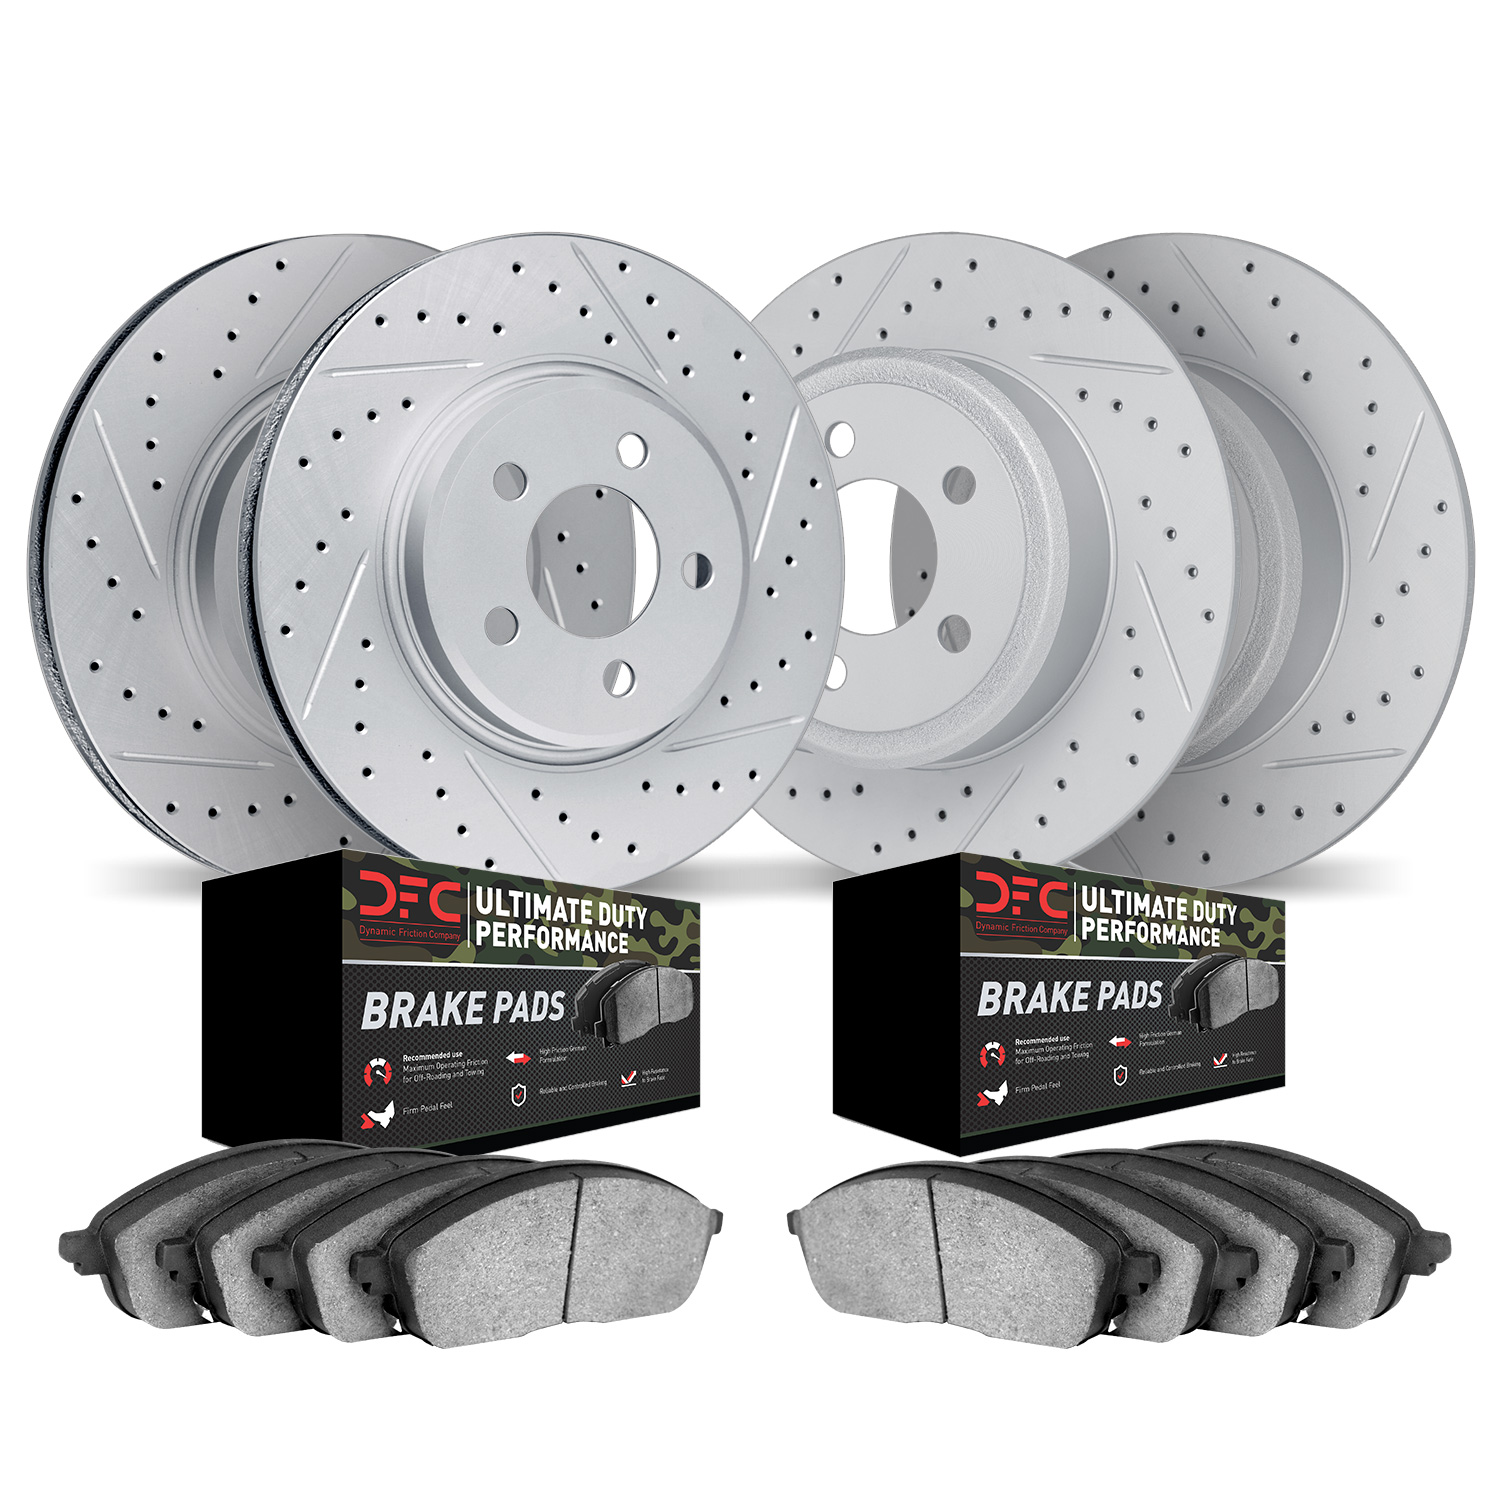 2404-42007 Geoperformance Drilled/Slotted Brake Rotors with Ultimate-Duty Brake Pads Kit, Fits Select Mopar, Position: Front and